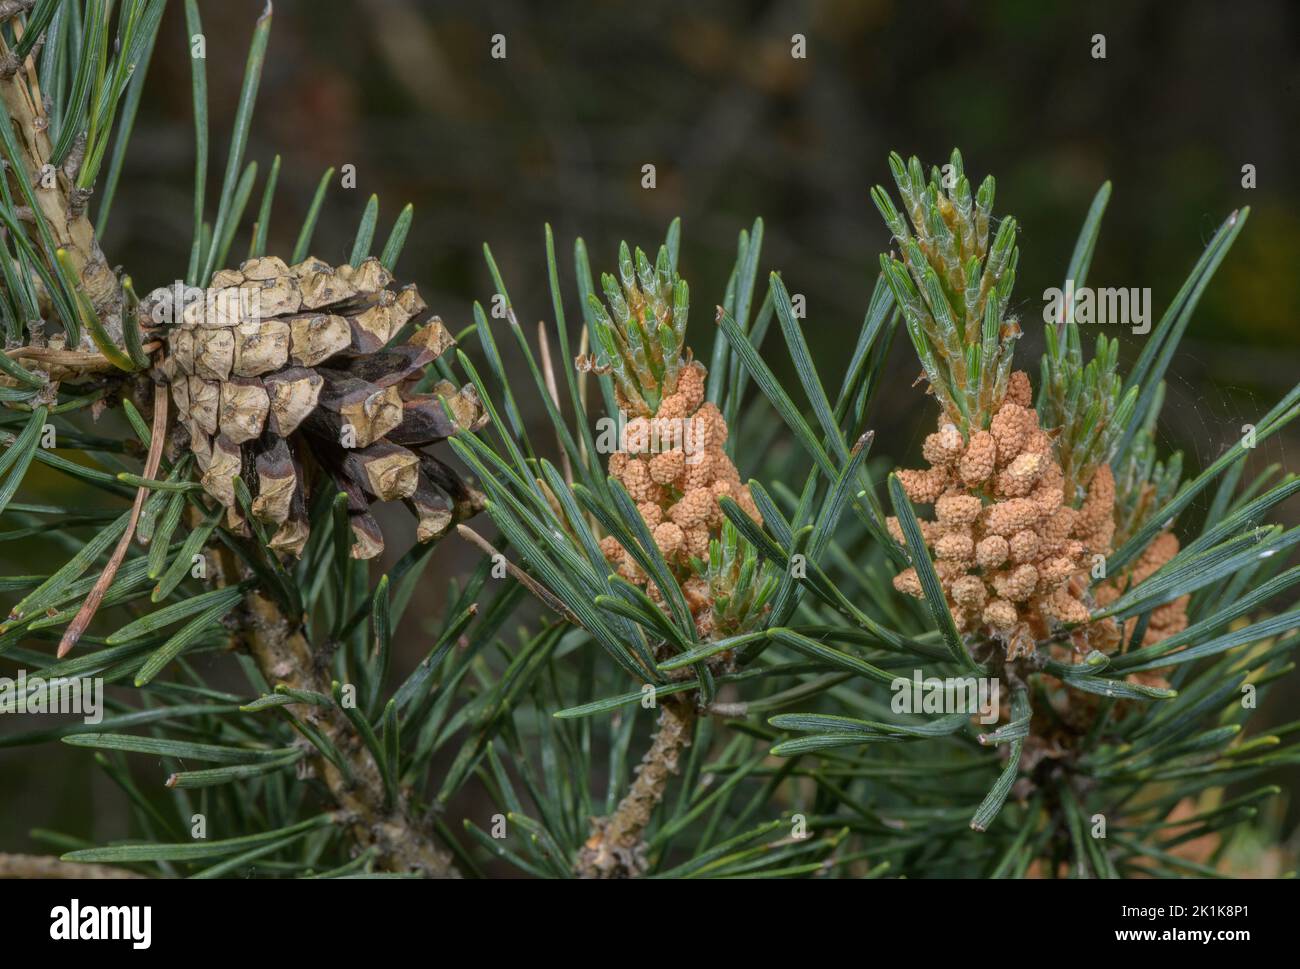 Cones and flowers of Scots Pine, Pinus sylvestris in spring. Stock Photo